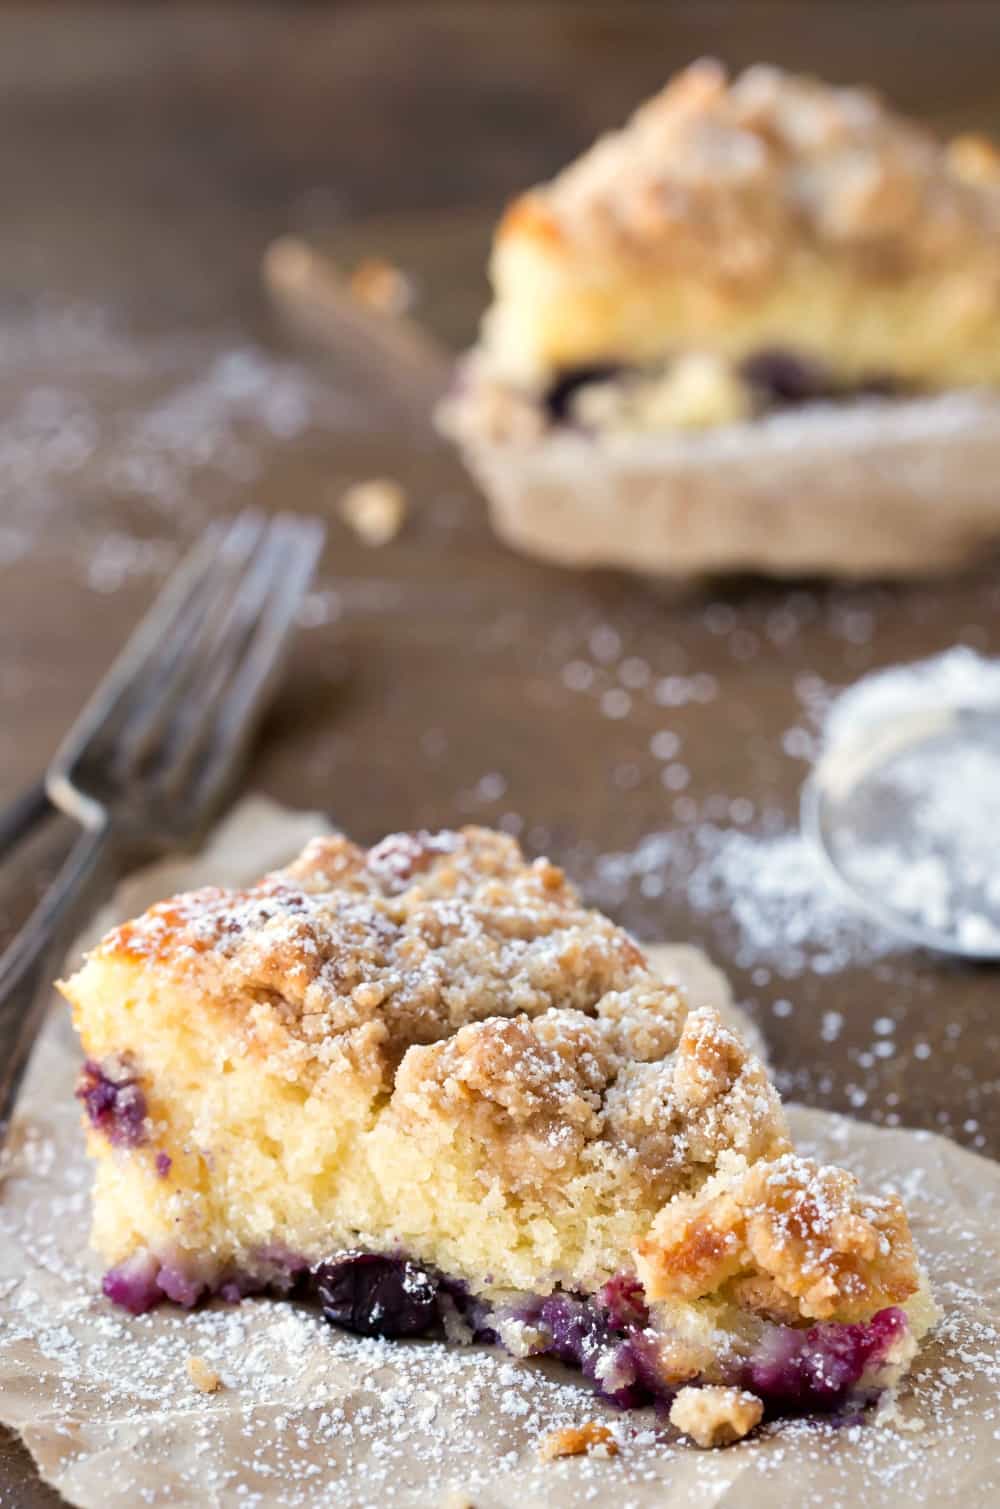 Slice of Blueberry Coffee Cake dusted with powdered sugar